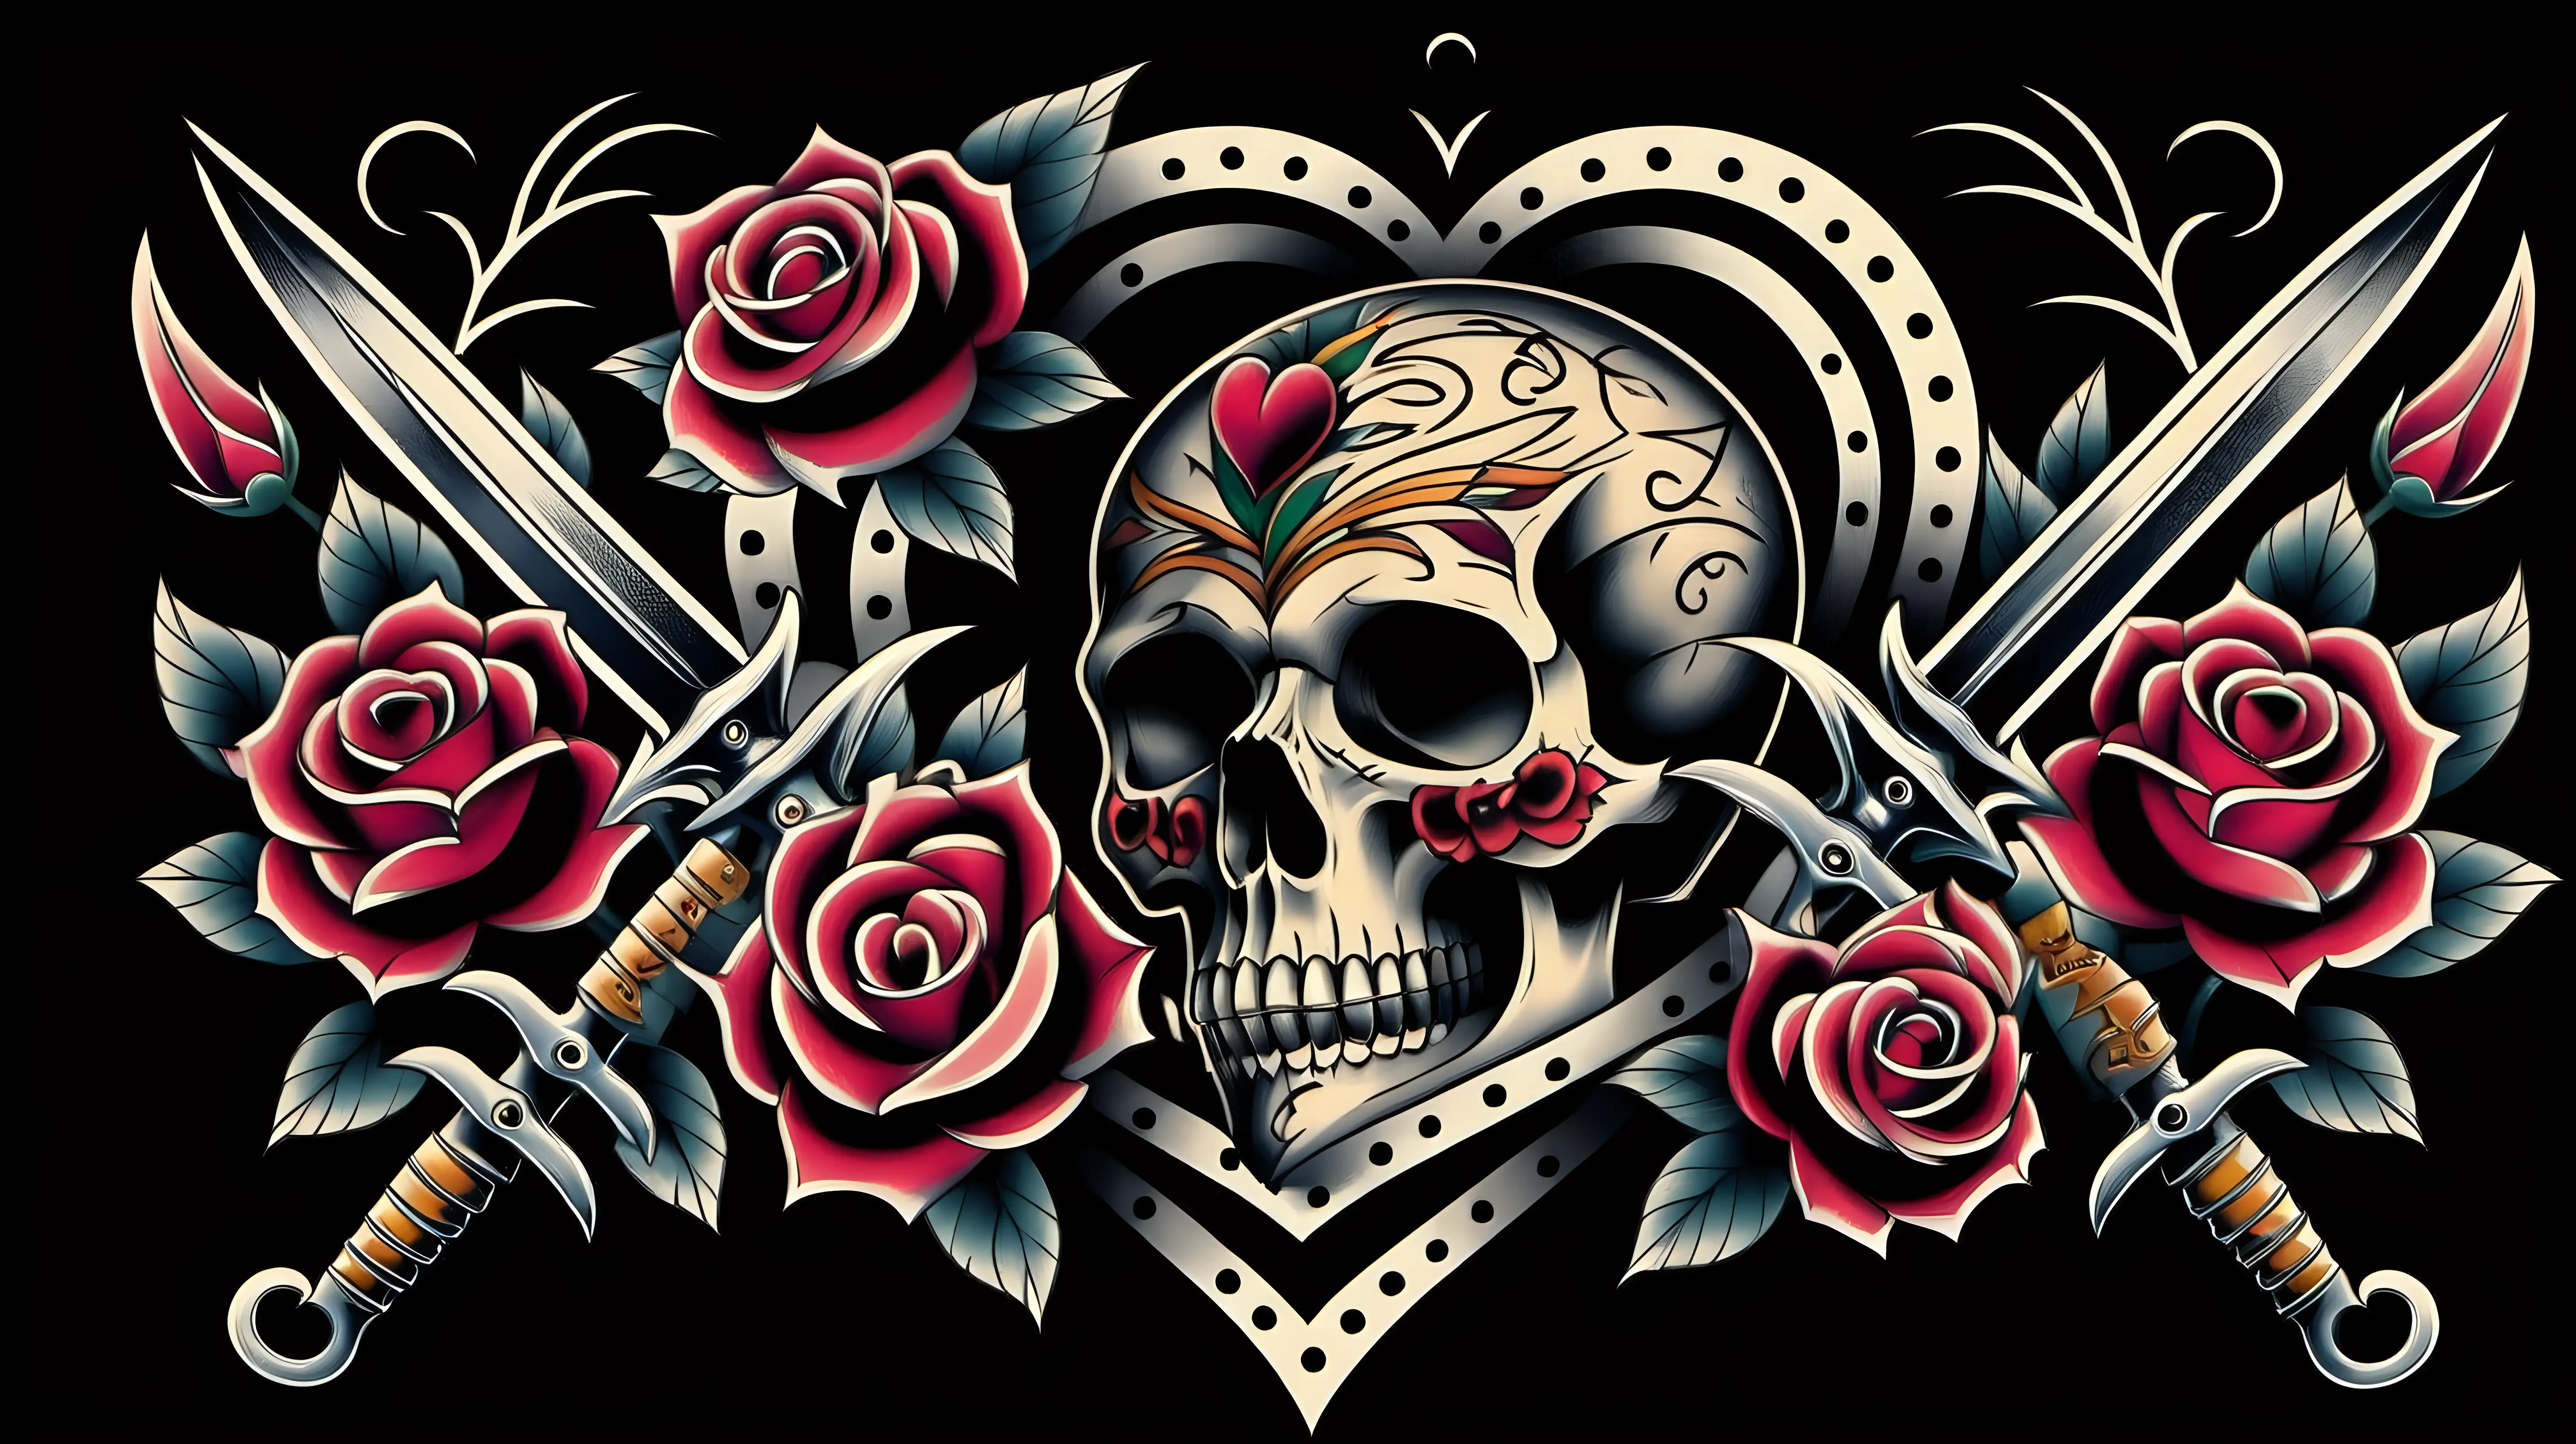 Oldschool Tattoo Design with Roses Skull Dagger and Heart on Black Background